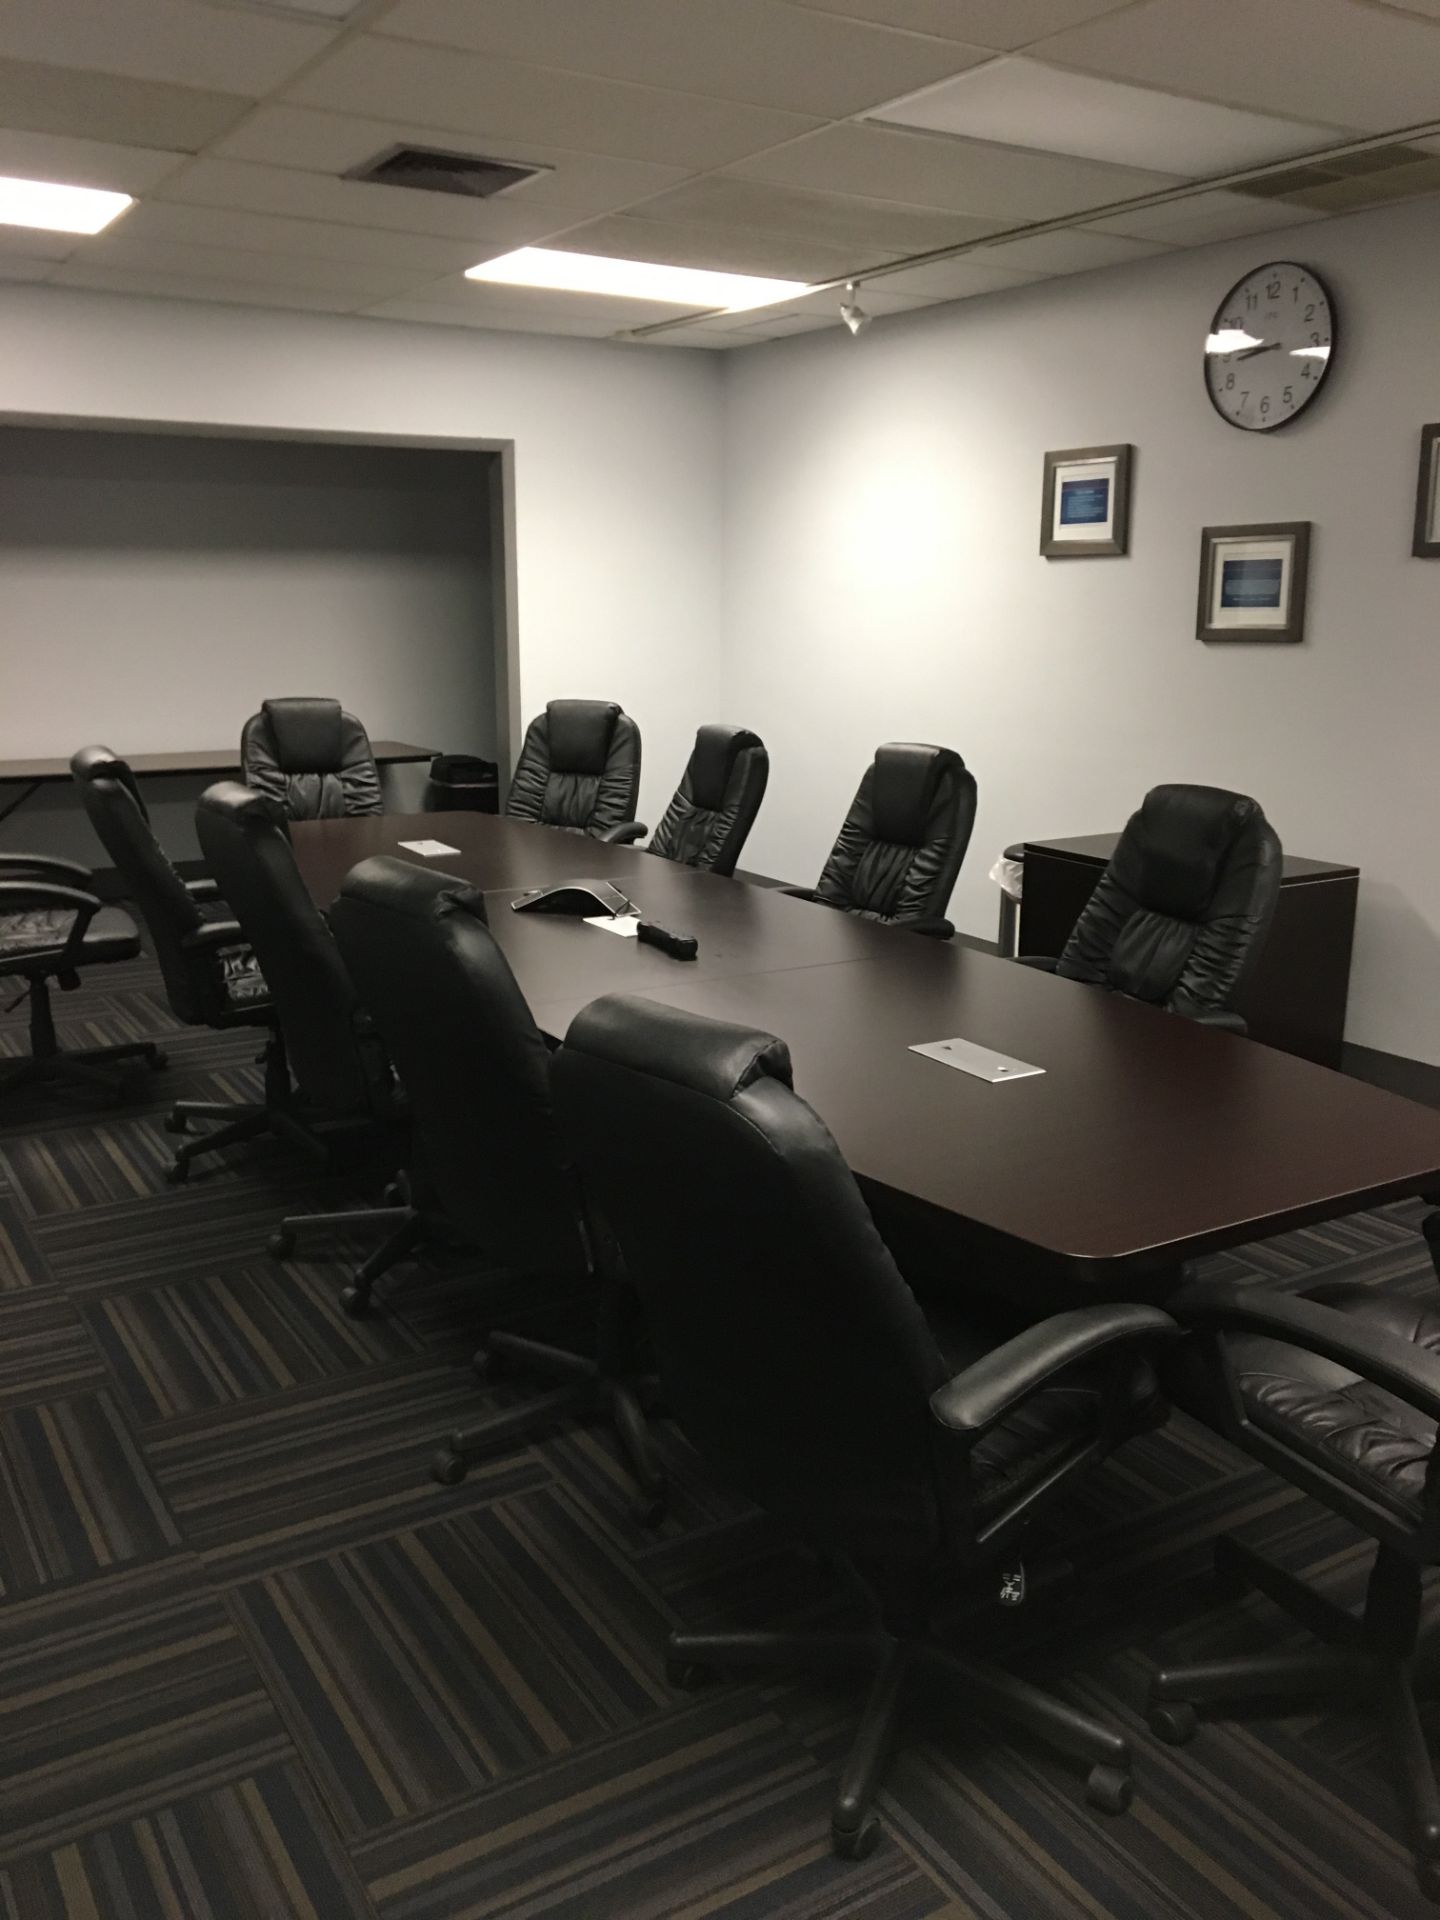 LOT: Contents of Conference Room includes, Conference Table, Chairs, Cabinets, TV - Image 2 of 3